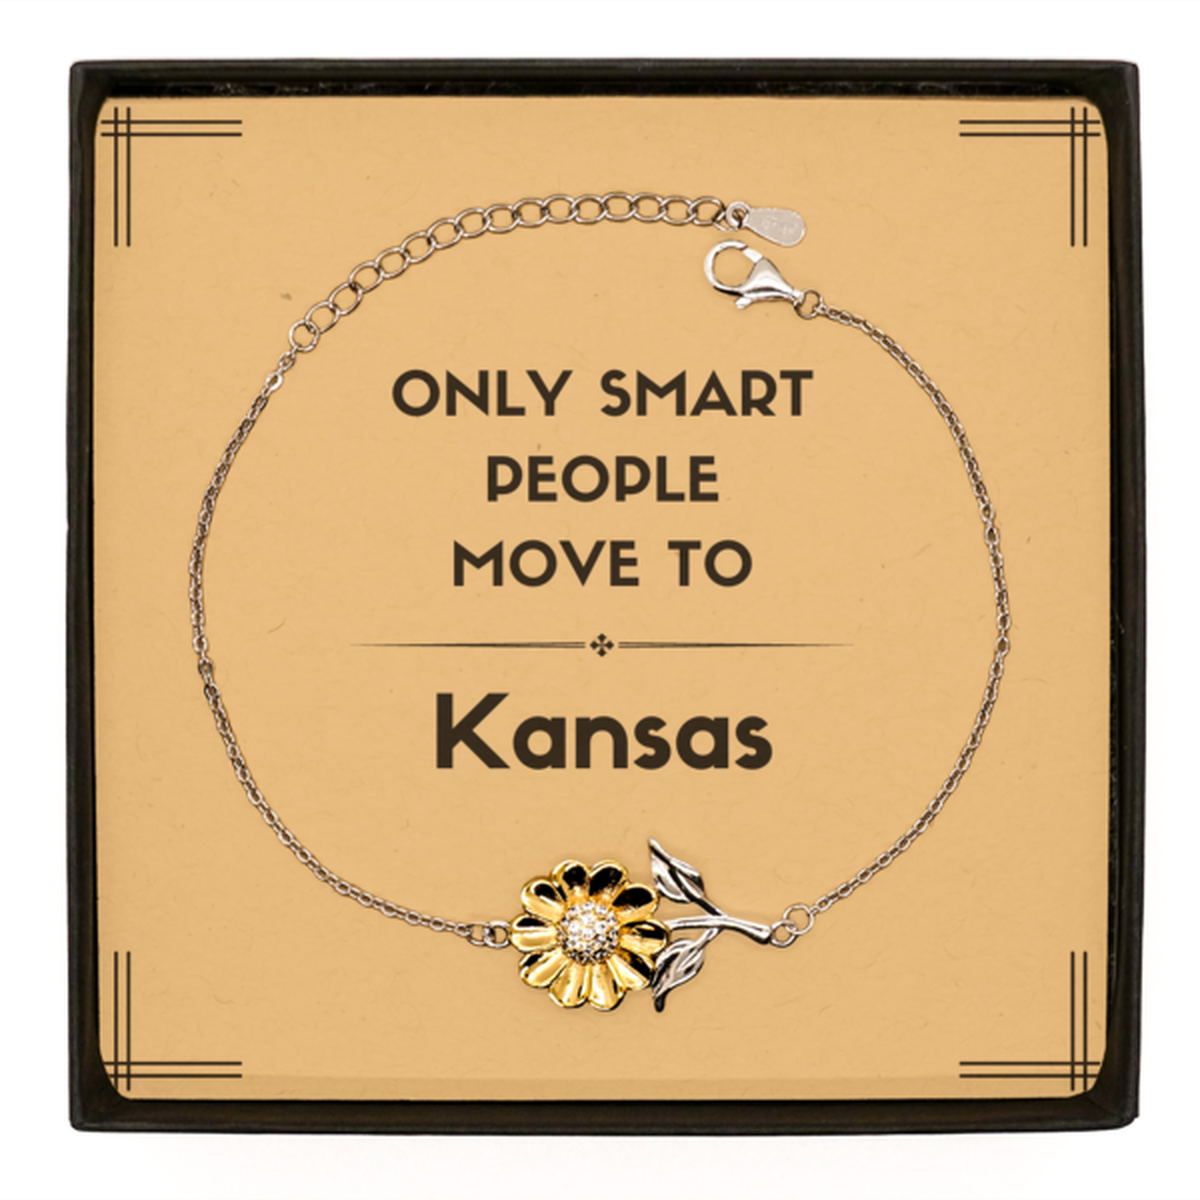 Only smart people move to Kansas Sunflower Bracelet, Message Card Gifts For Kansas, Move to Kansas Gifts for Friends Coworker Funny Saying Quote